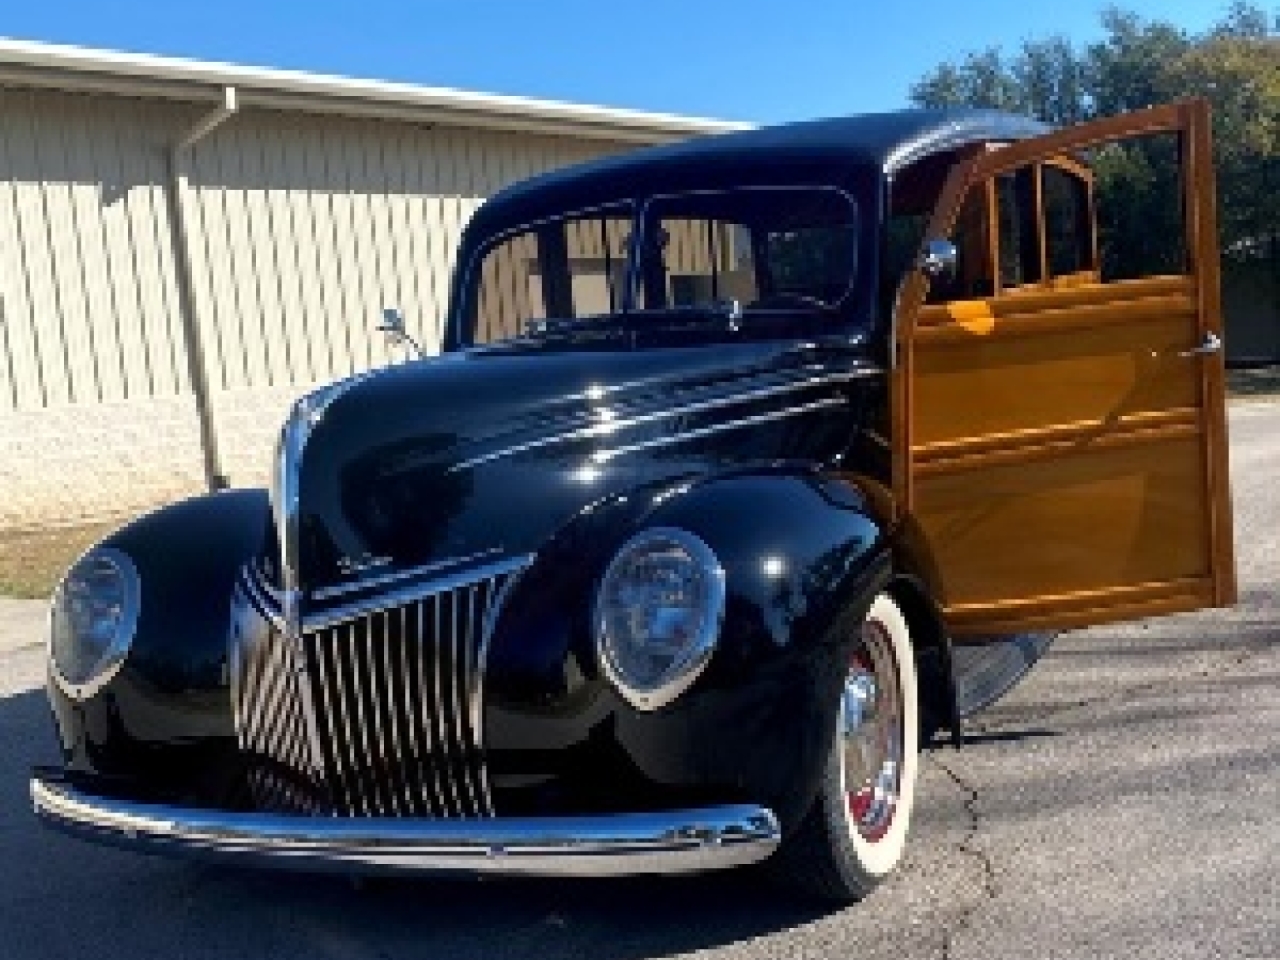 1939 Ford Deluxe Woodie